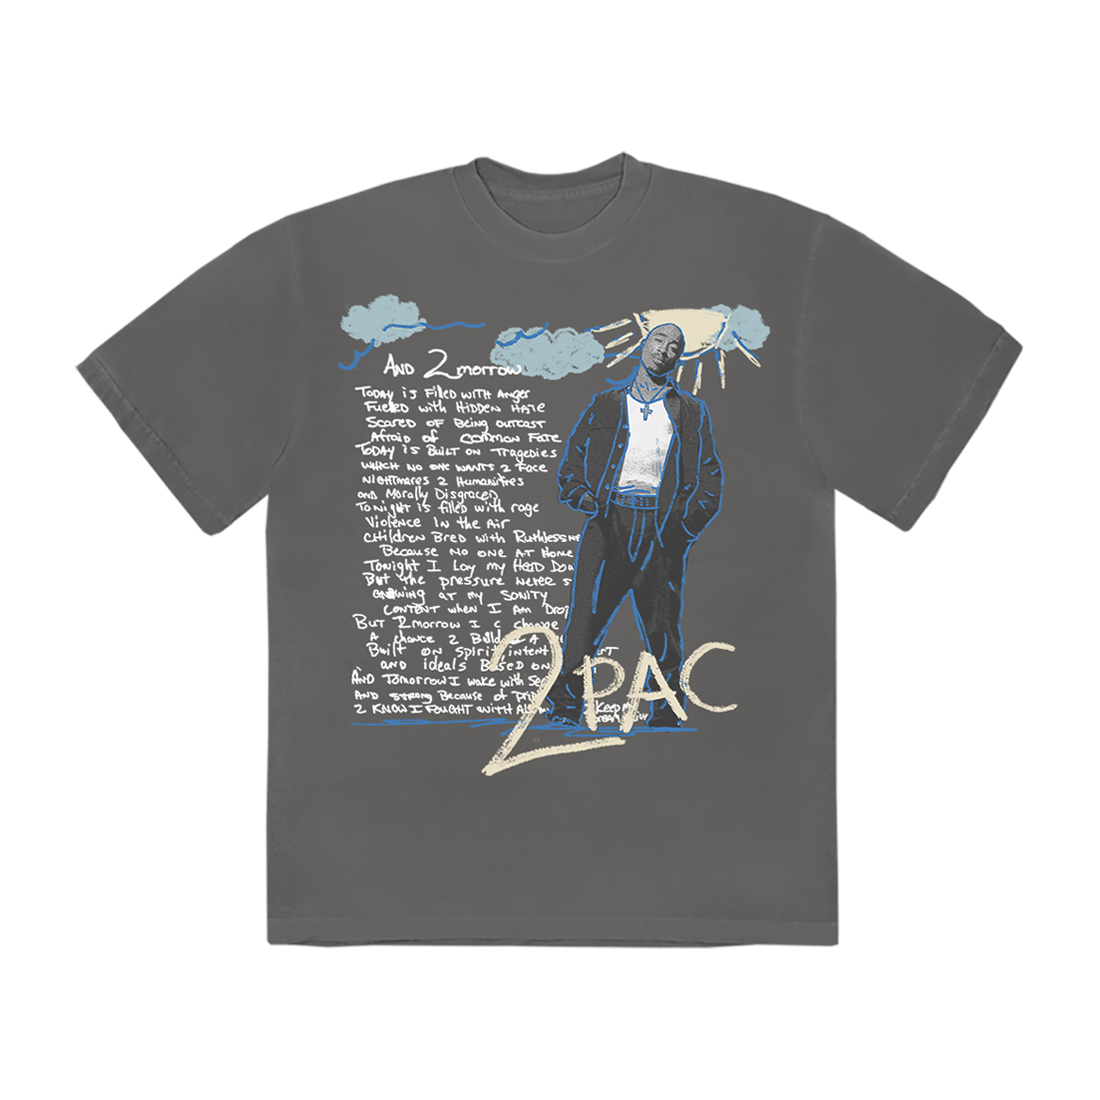 2Pac - "And 2Morrow" Notebook T-Shirt